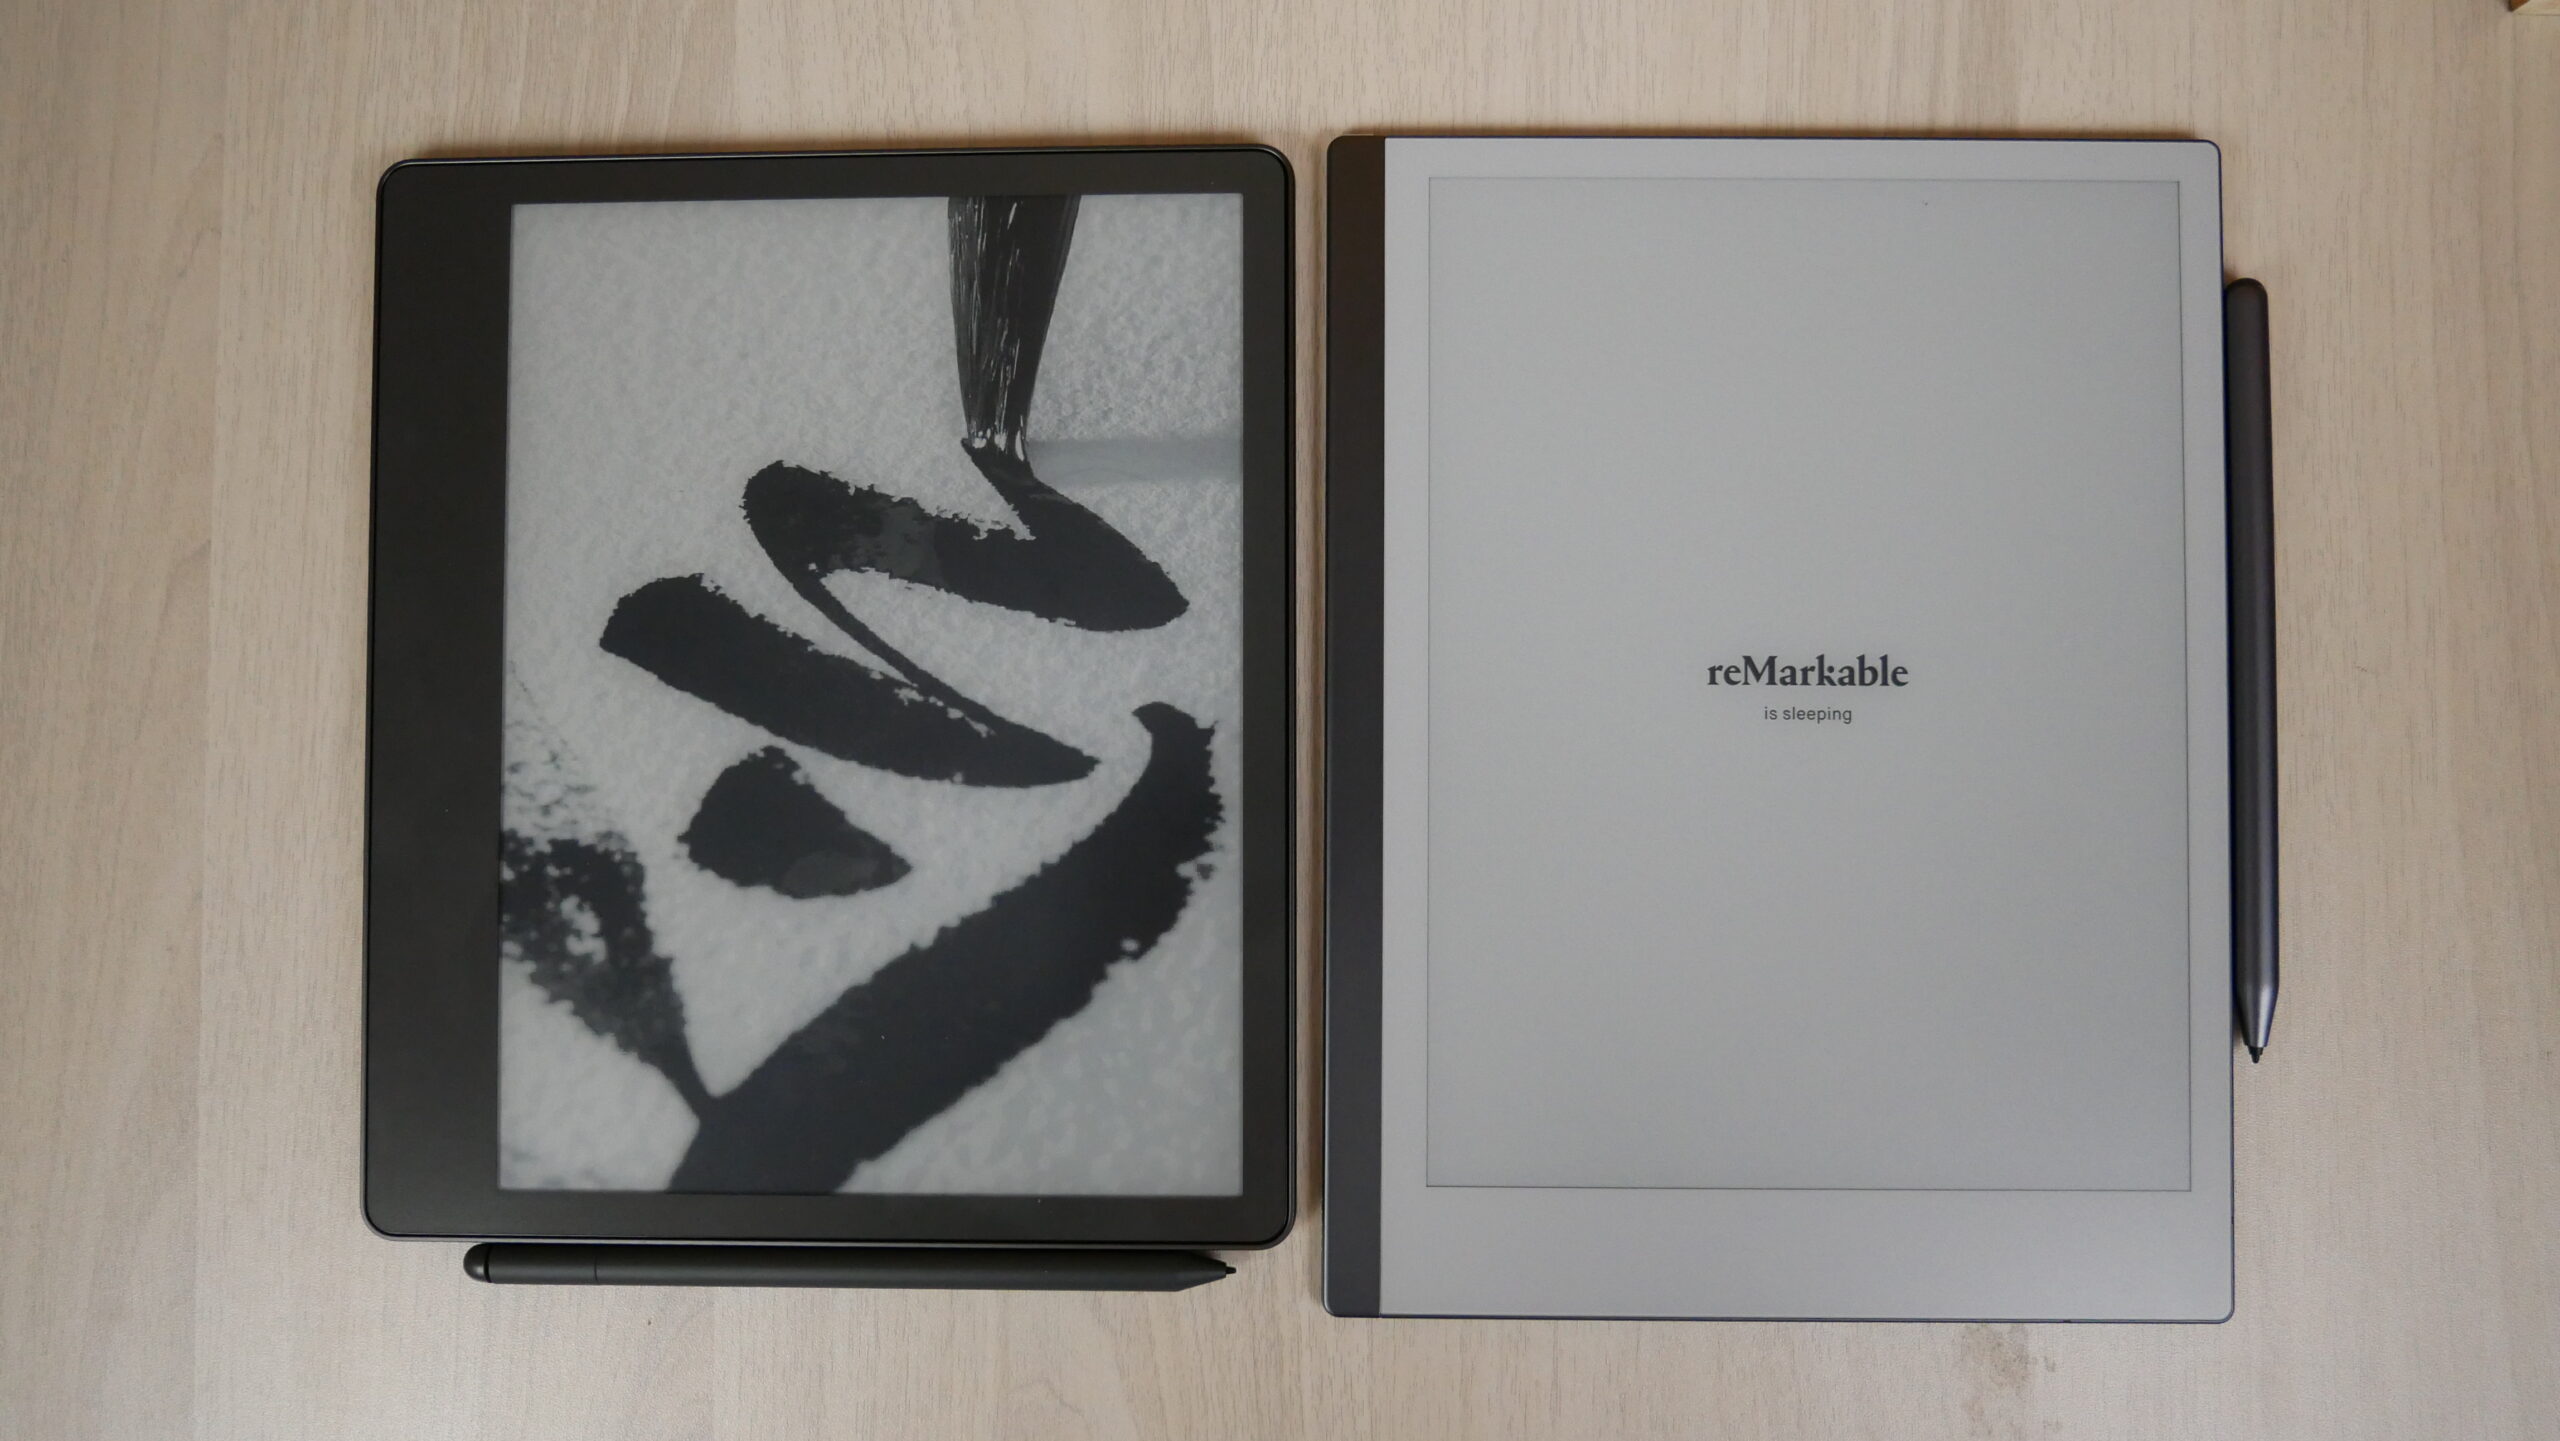 Remarkable 2 vs the Amazon Kindle Scribe – What one is better?